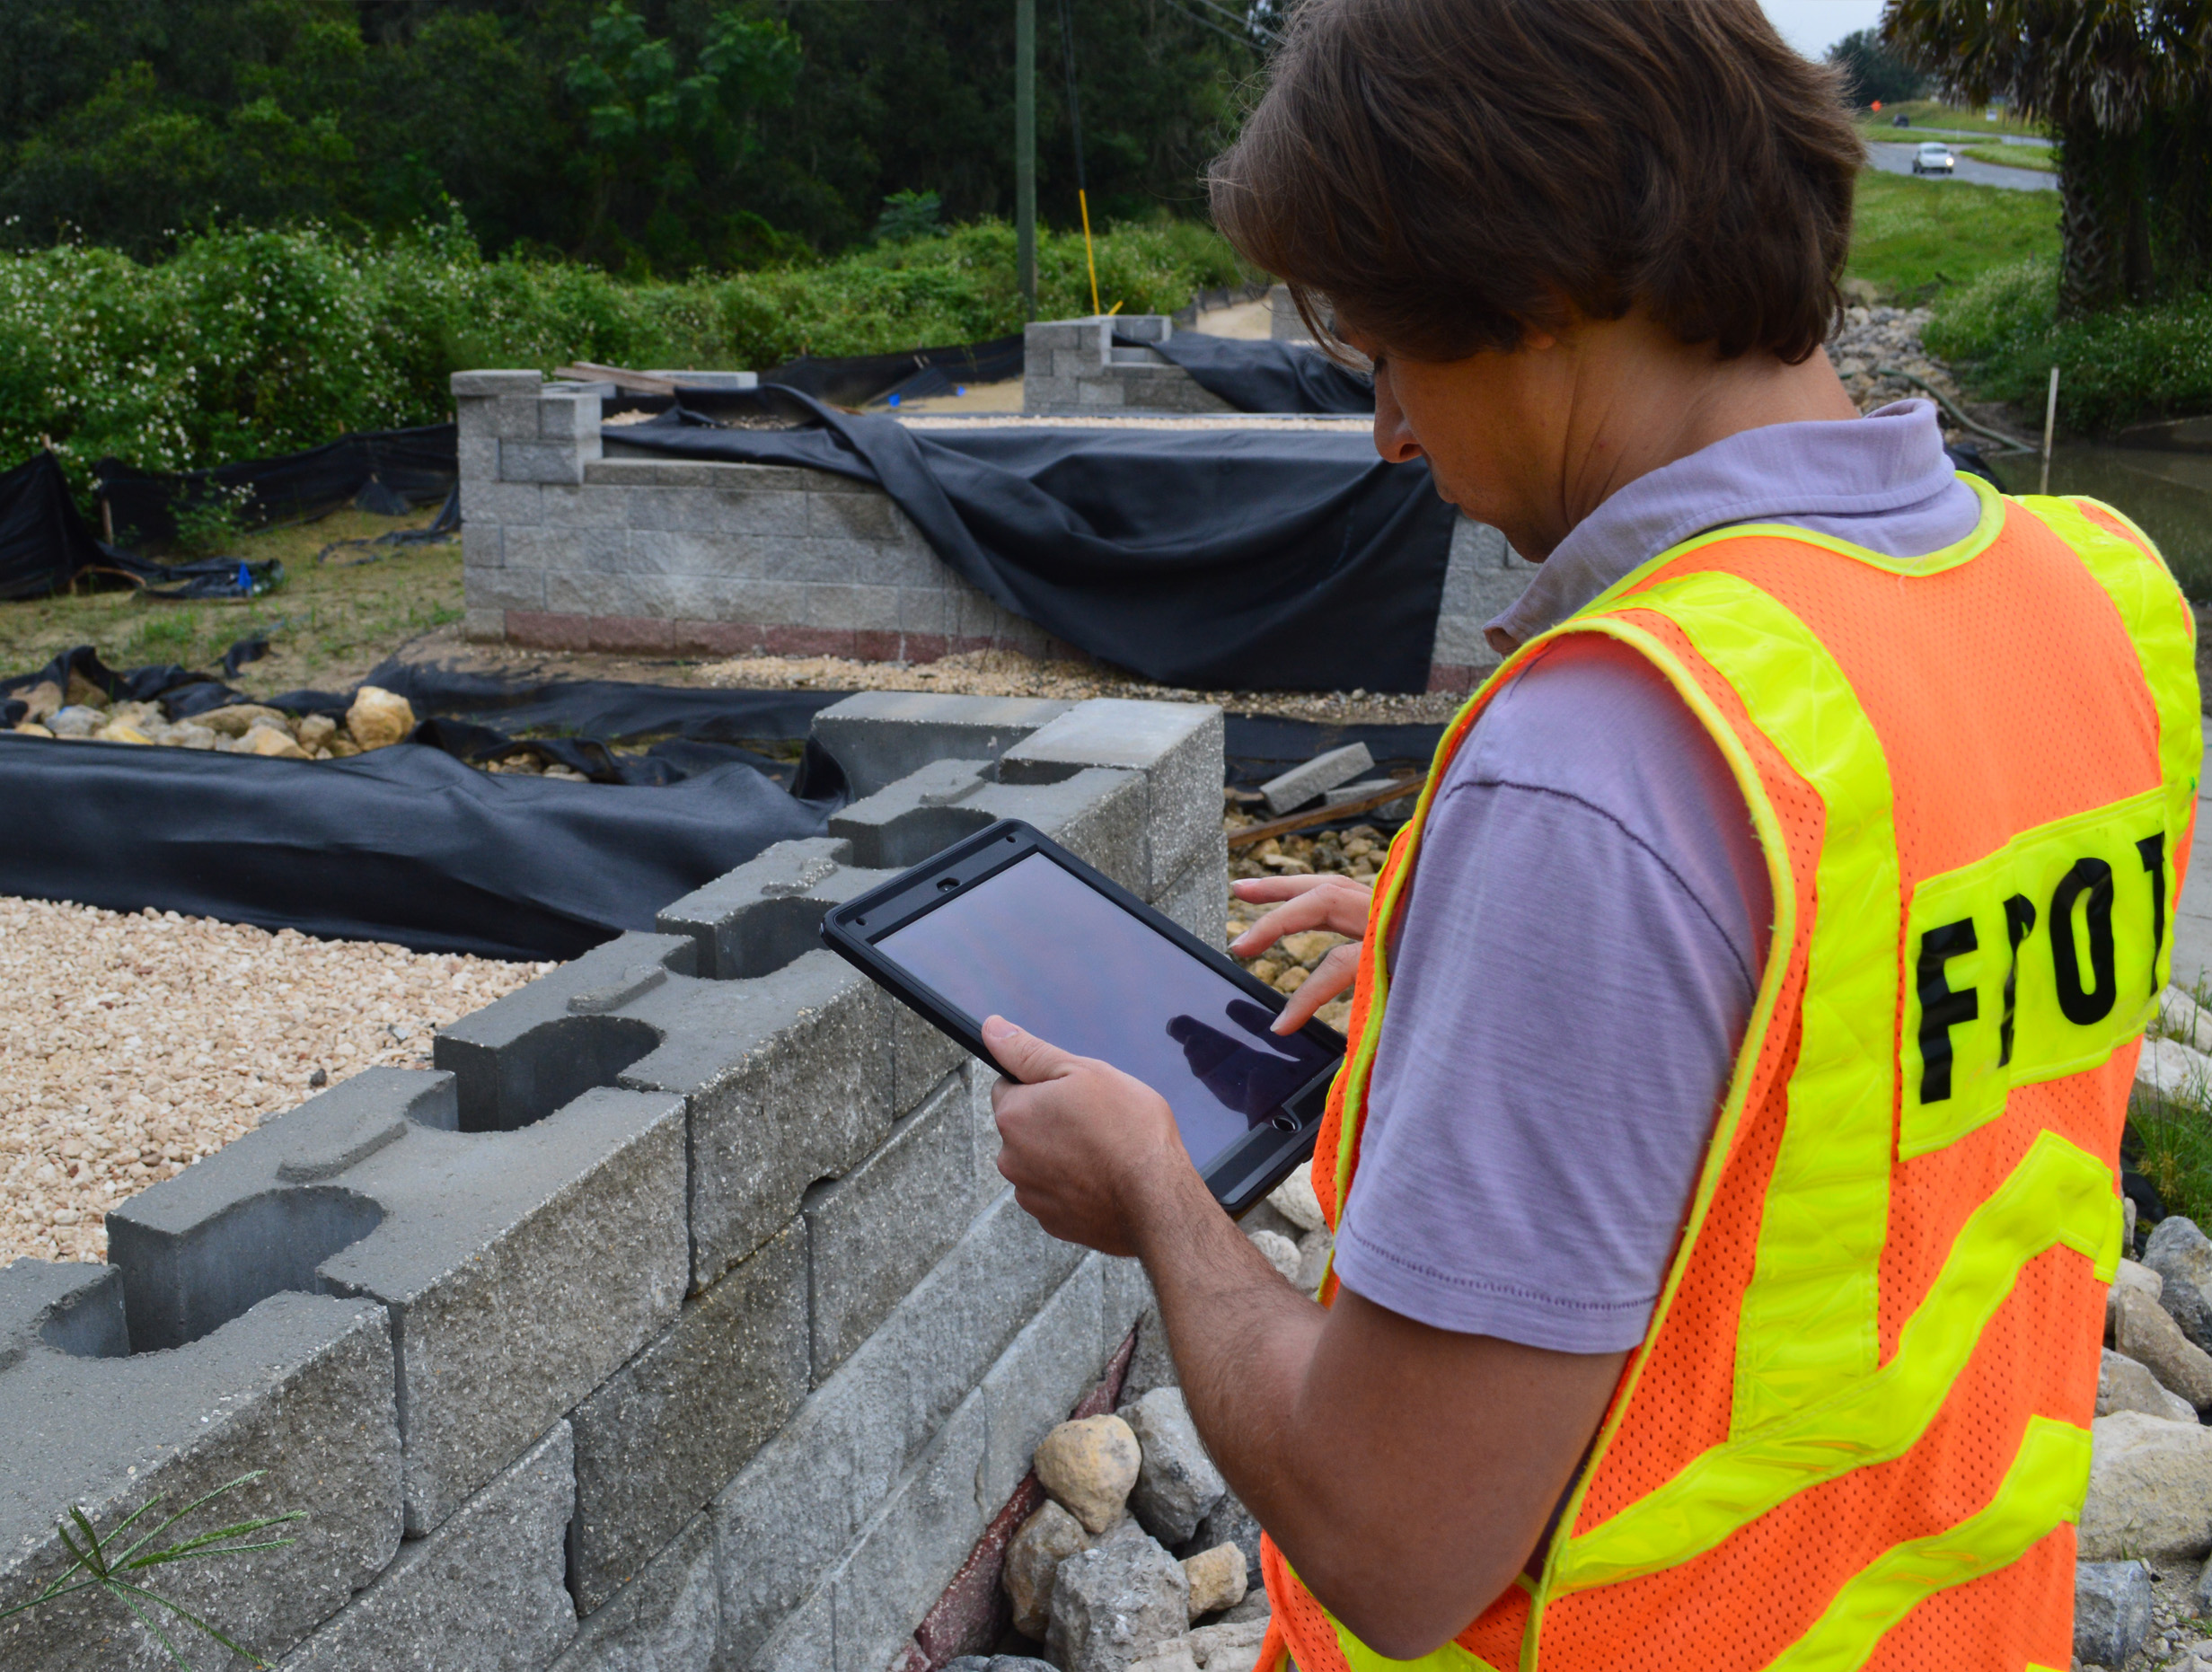 A man in a safety vest standing in front of a cement block wall and working on a tablet.